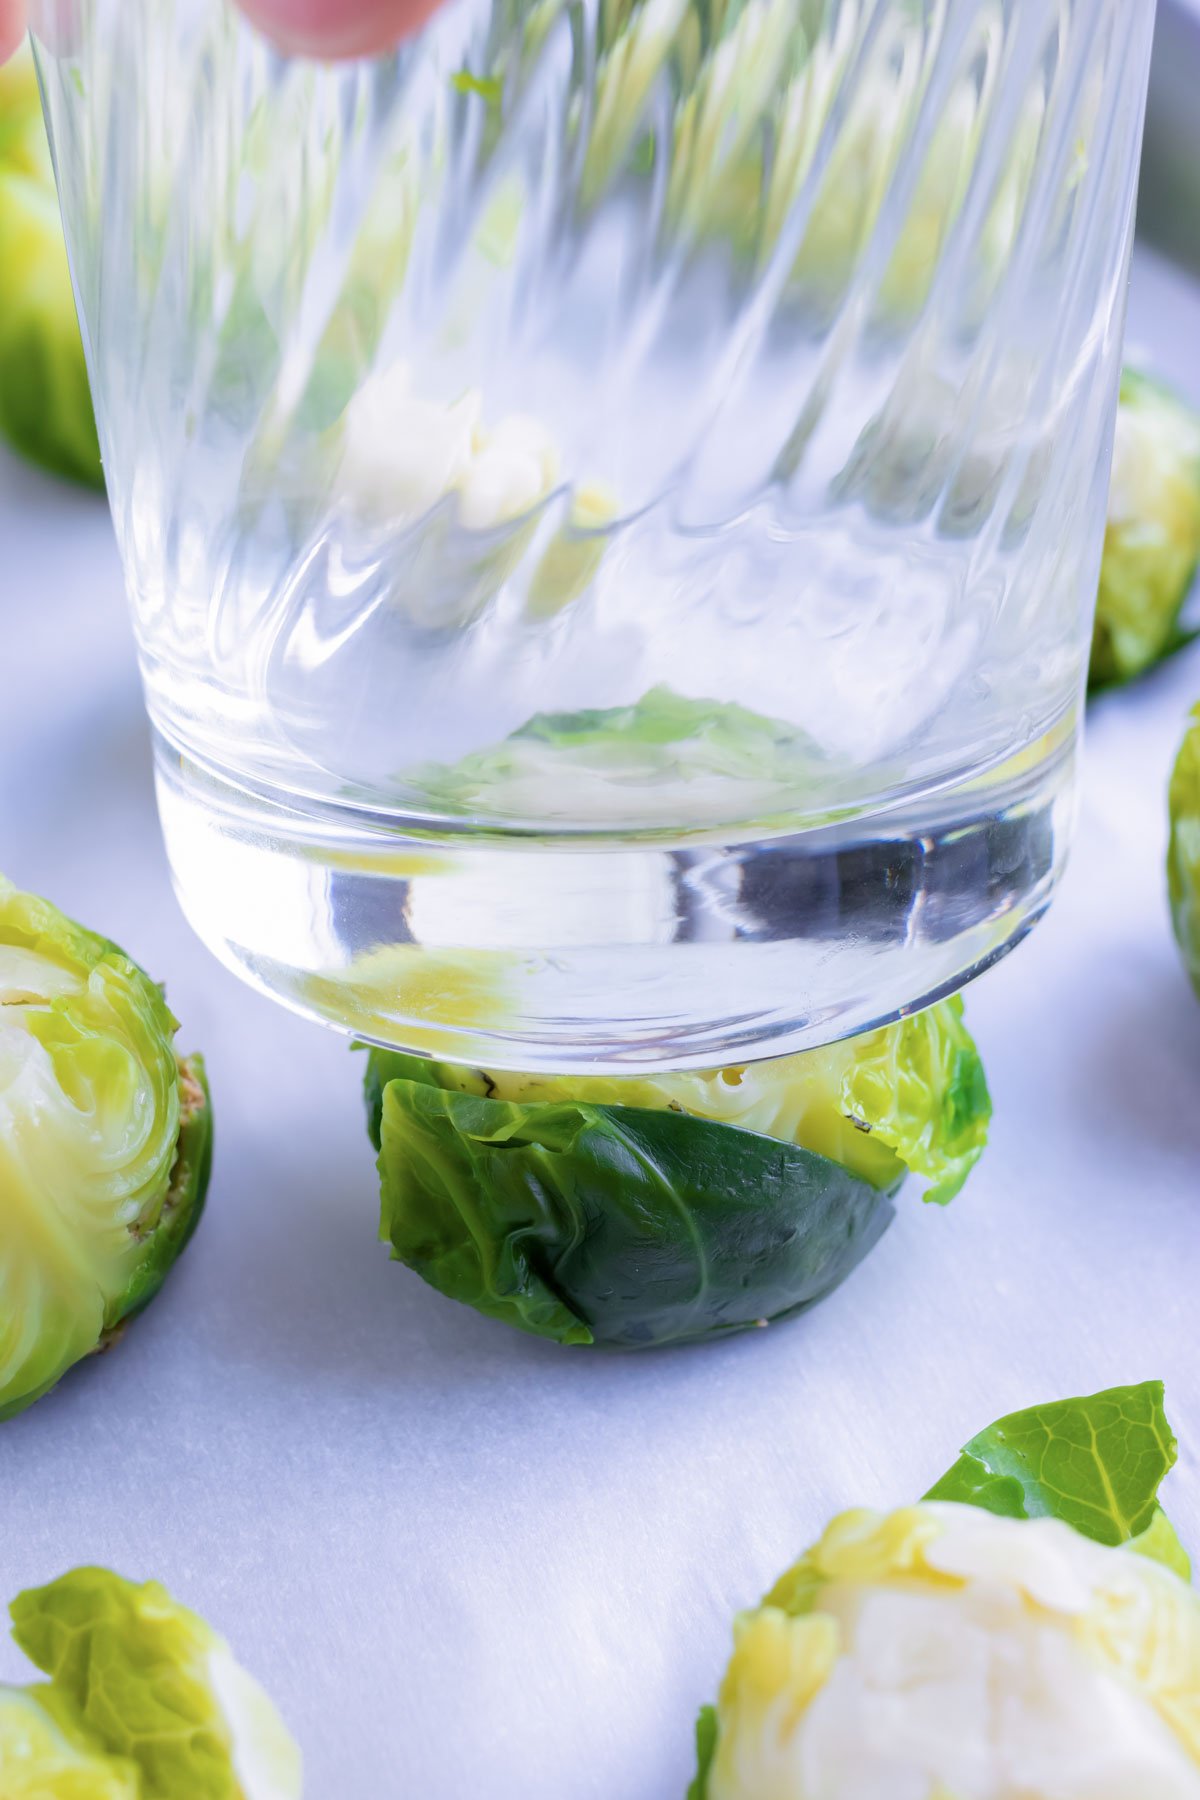 The bottom of a glass is used to smash the boiled Brussels sprouts.